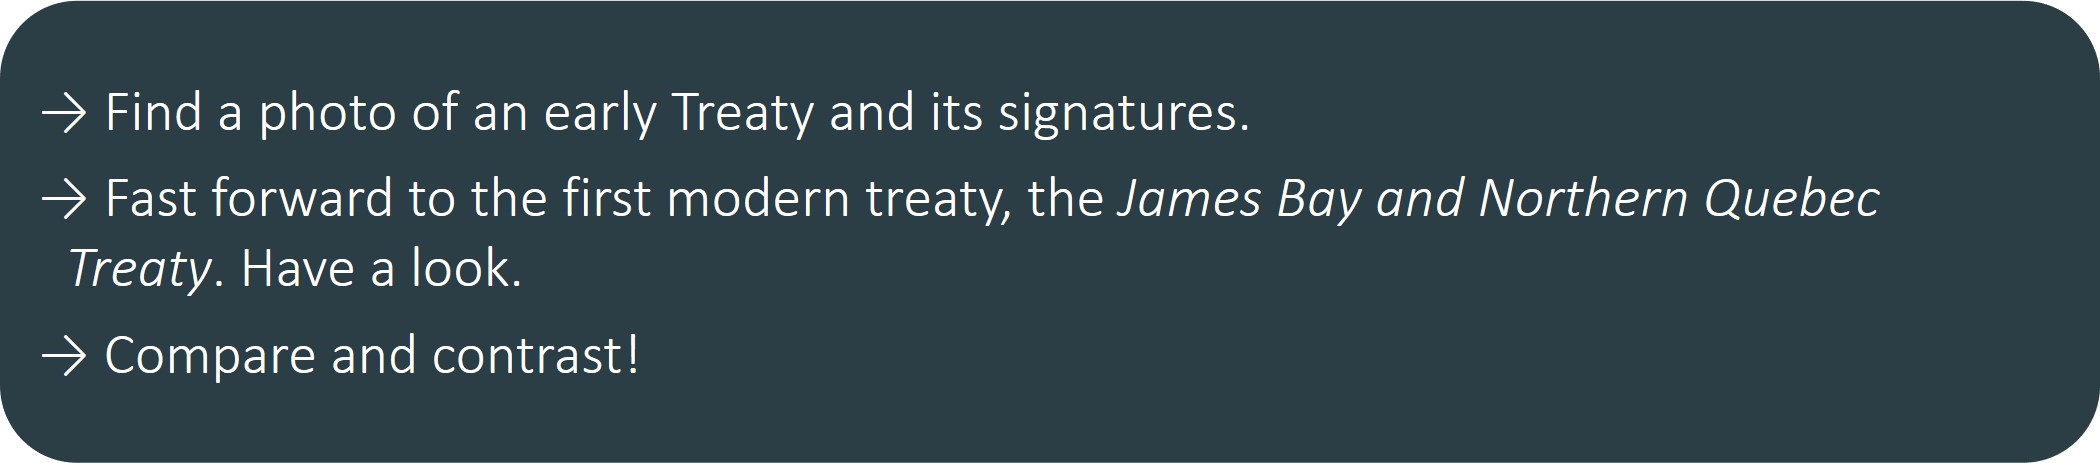 Find a photo of an early Treaty and its signatures. Fast forward to the first modern treaty, the James Bay and Northern Quebec Treaty. Have a look. Compare and contrast!